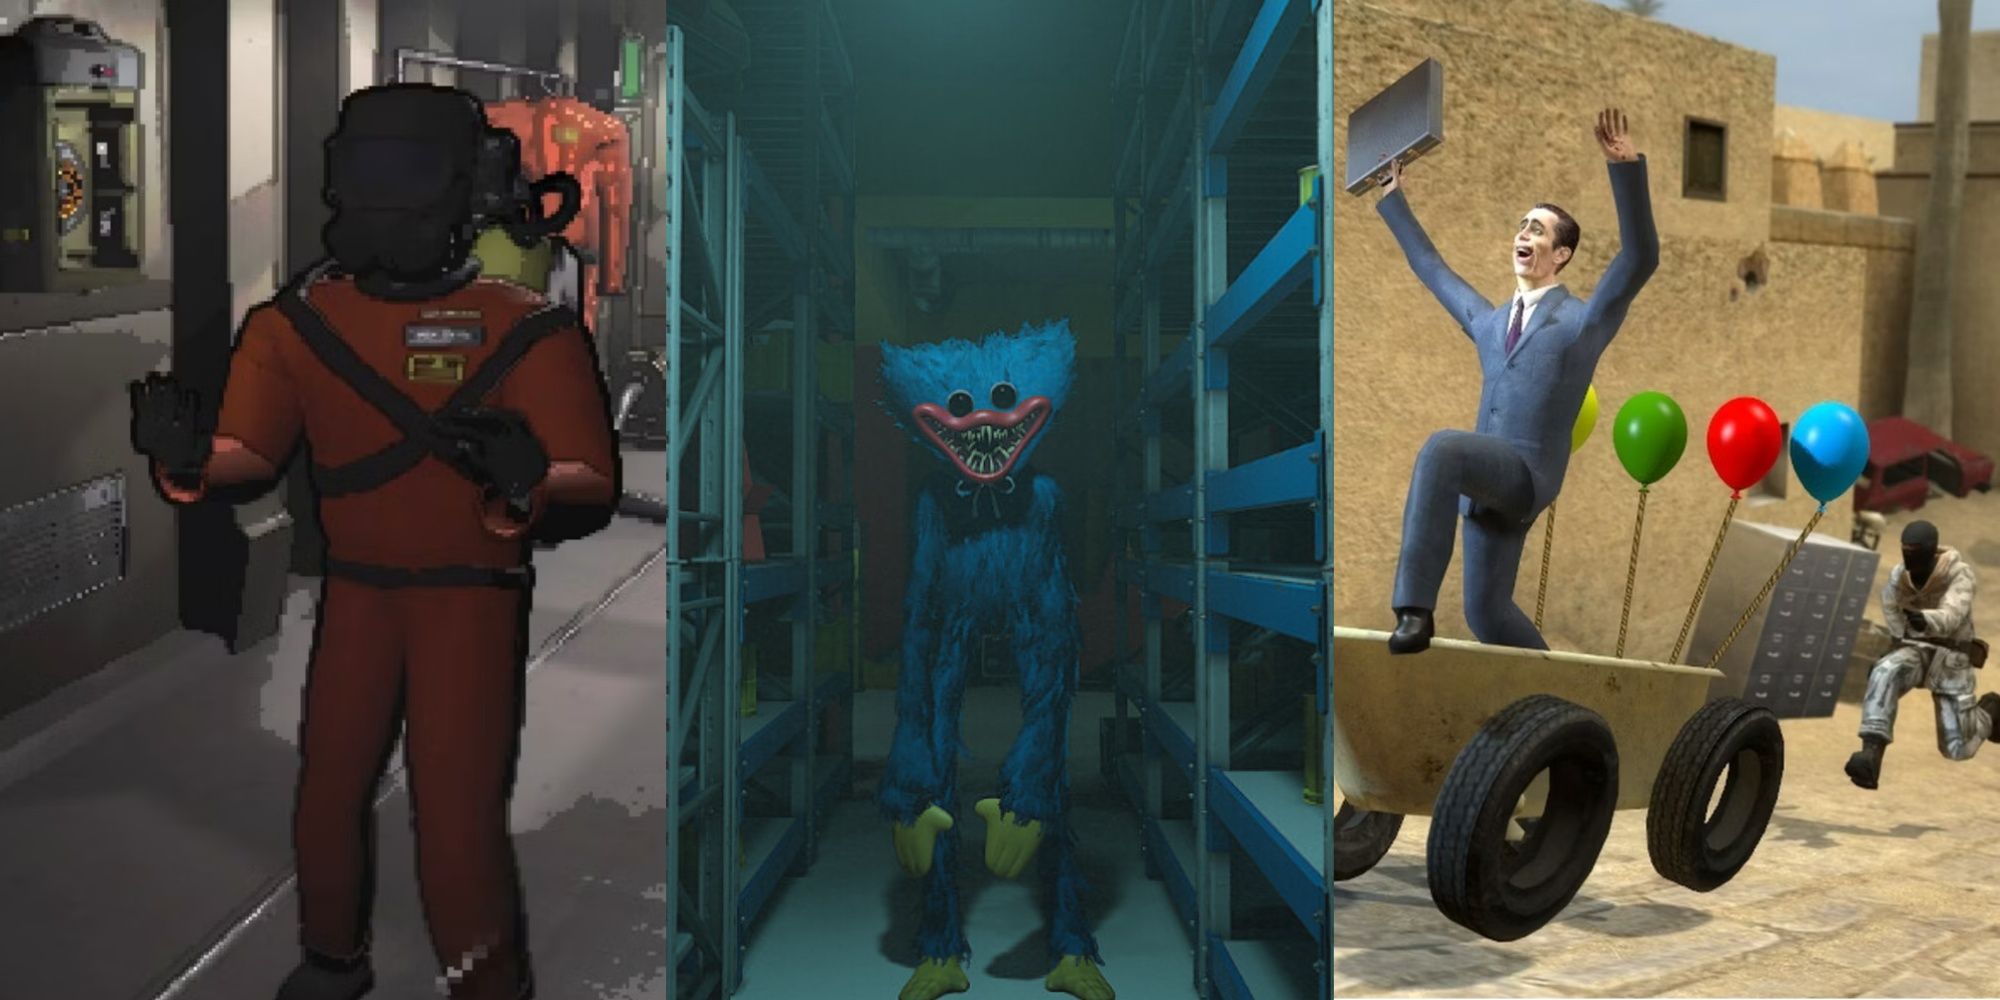 10 Best Games To Troll Your Friends In featured image with Lethal Company, Project Playtime, and Garry's Mod